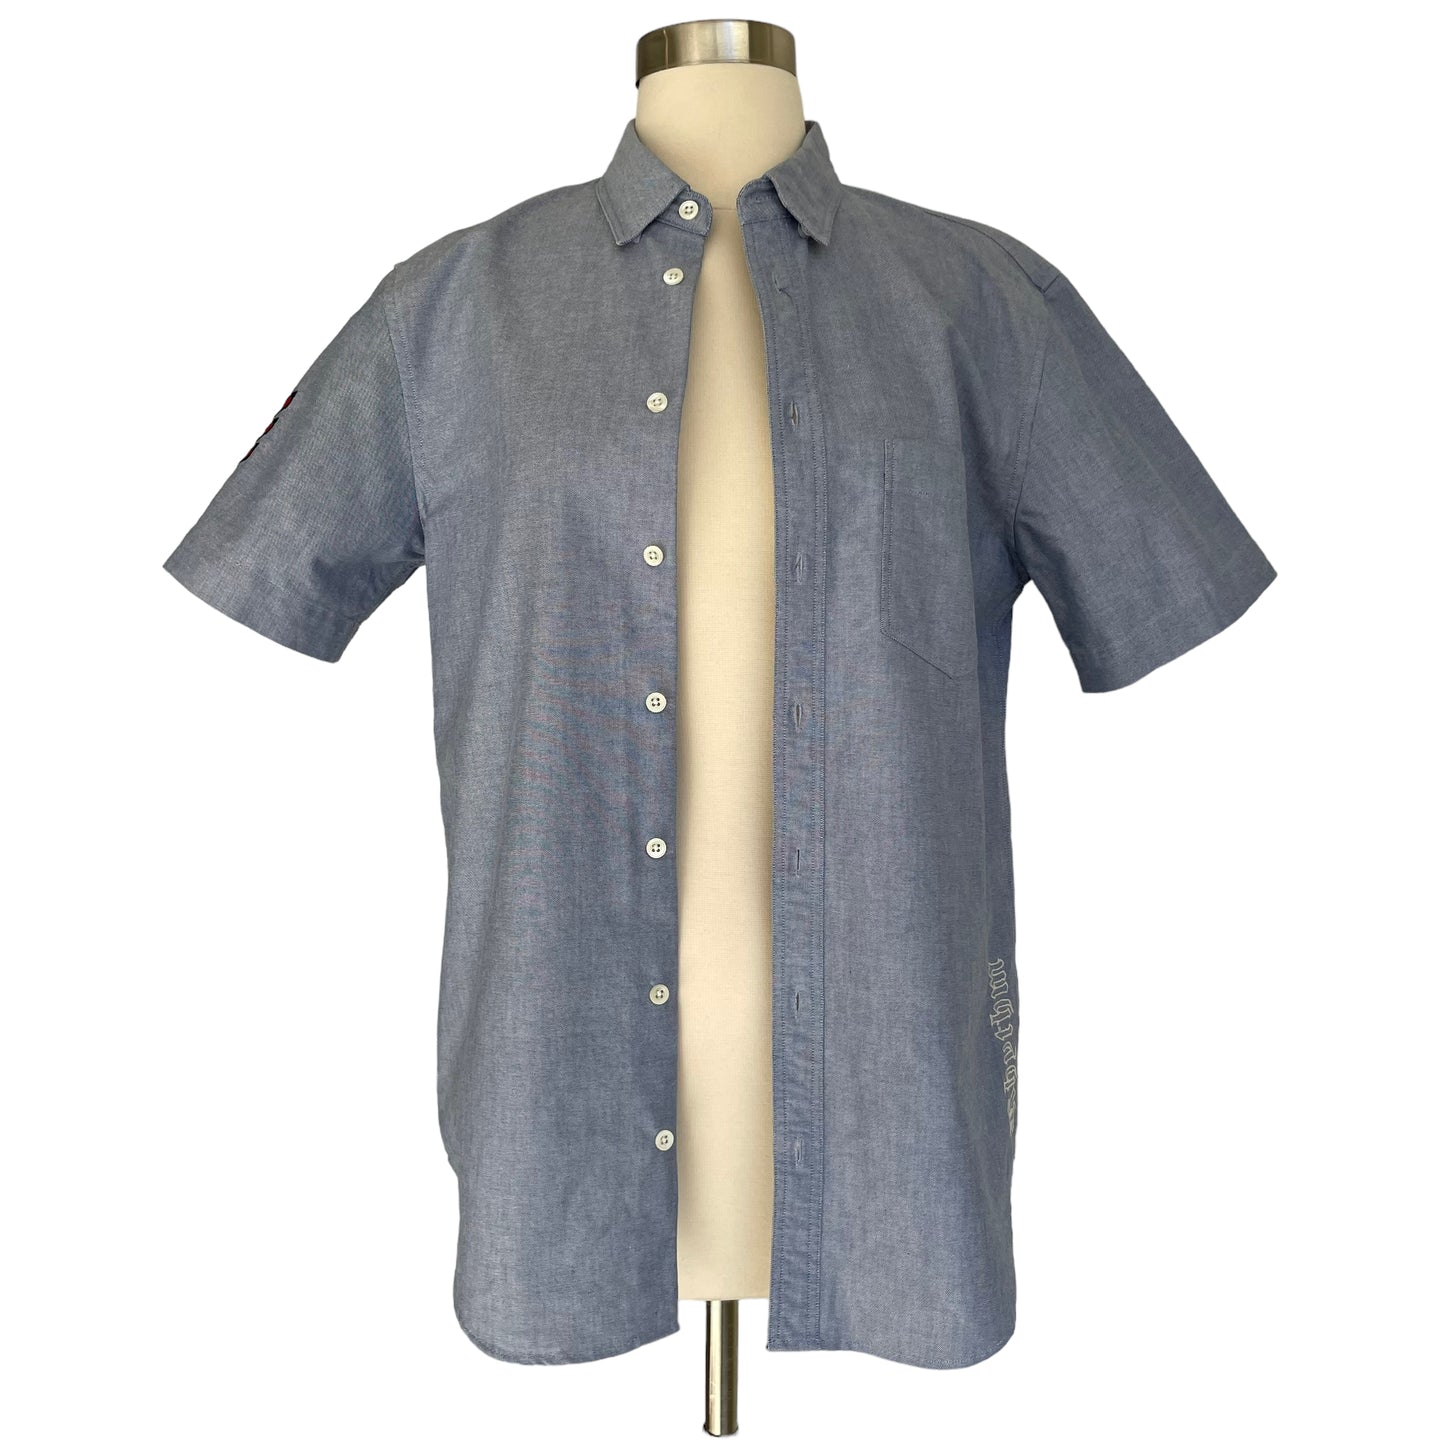 Embroidered Blue Collar Shirt - S/M